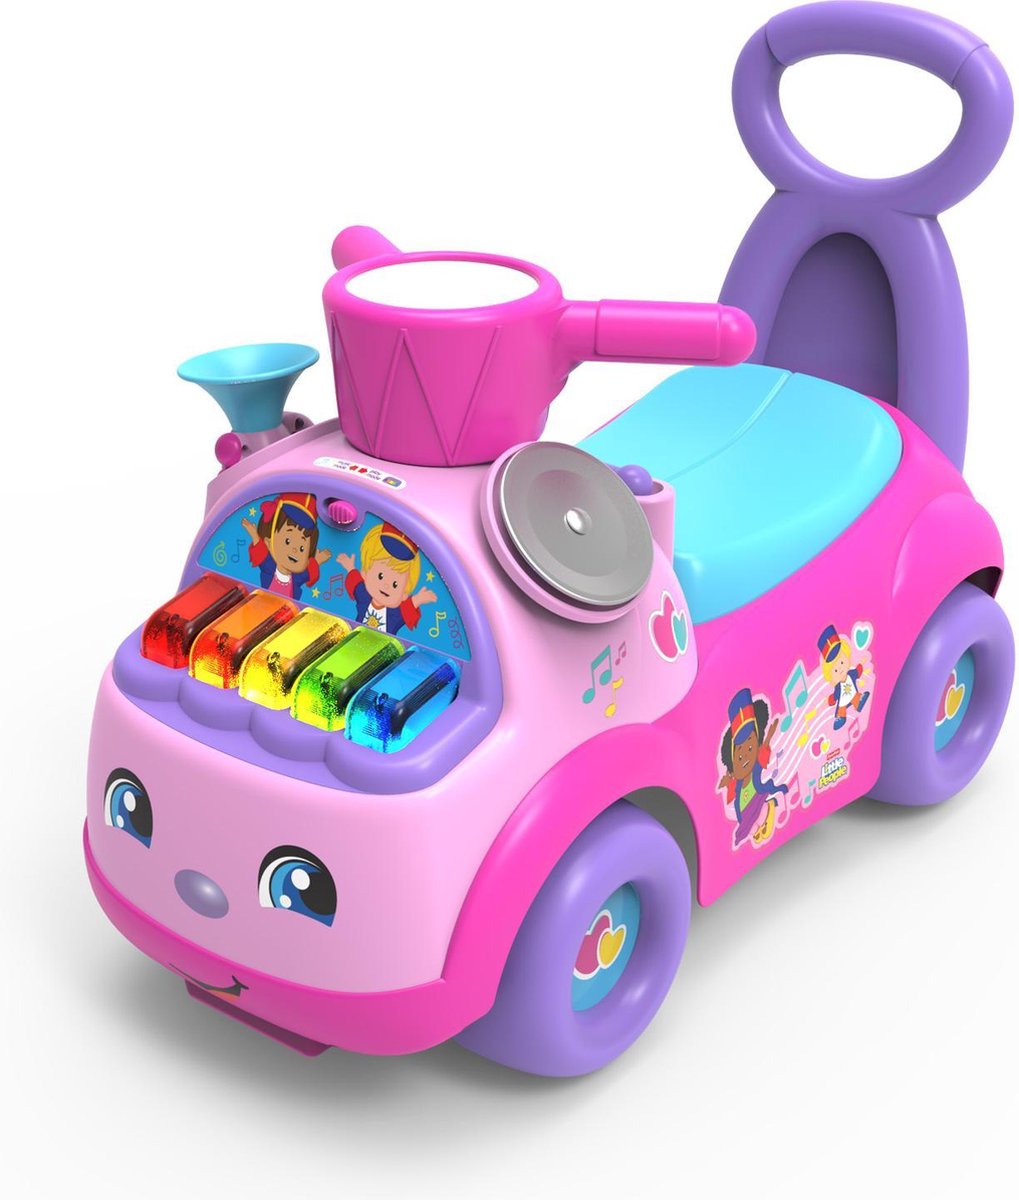 Inferieur Hoge blootstelling Traditie Fisher-Price Little People Music Parade Roze - Loopauto | bol.com